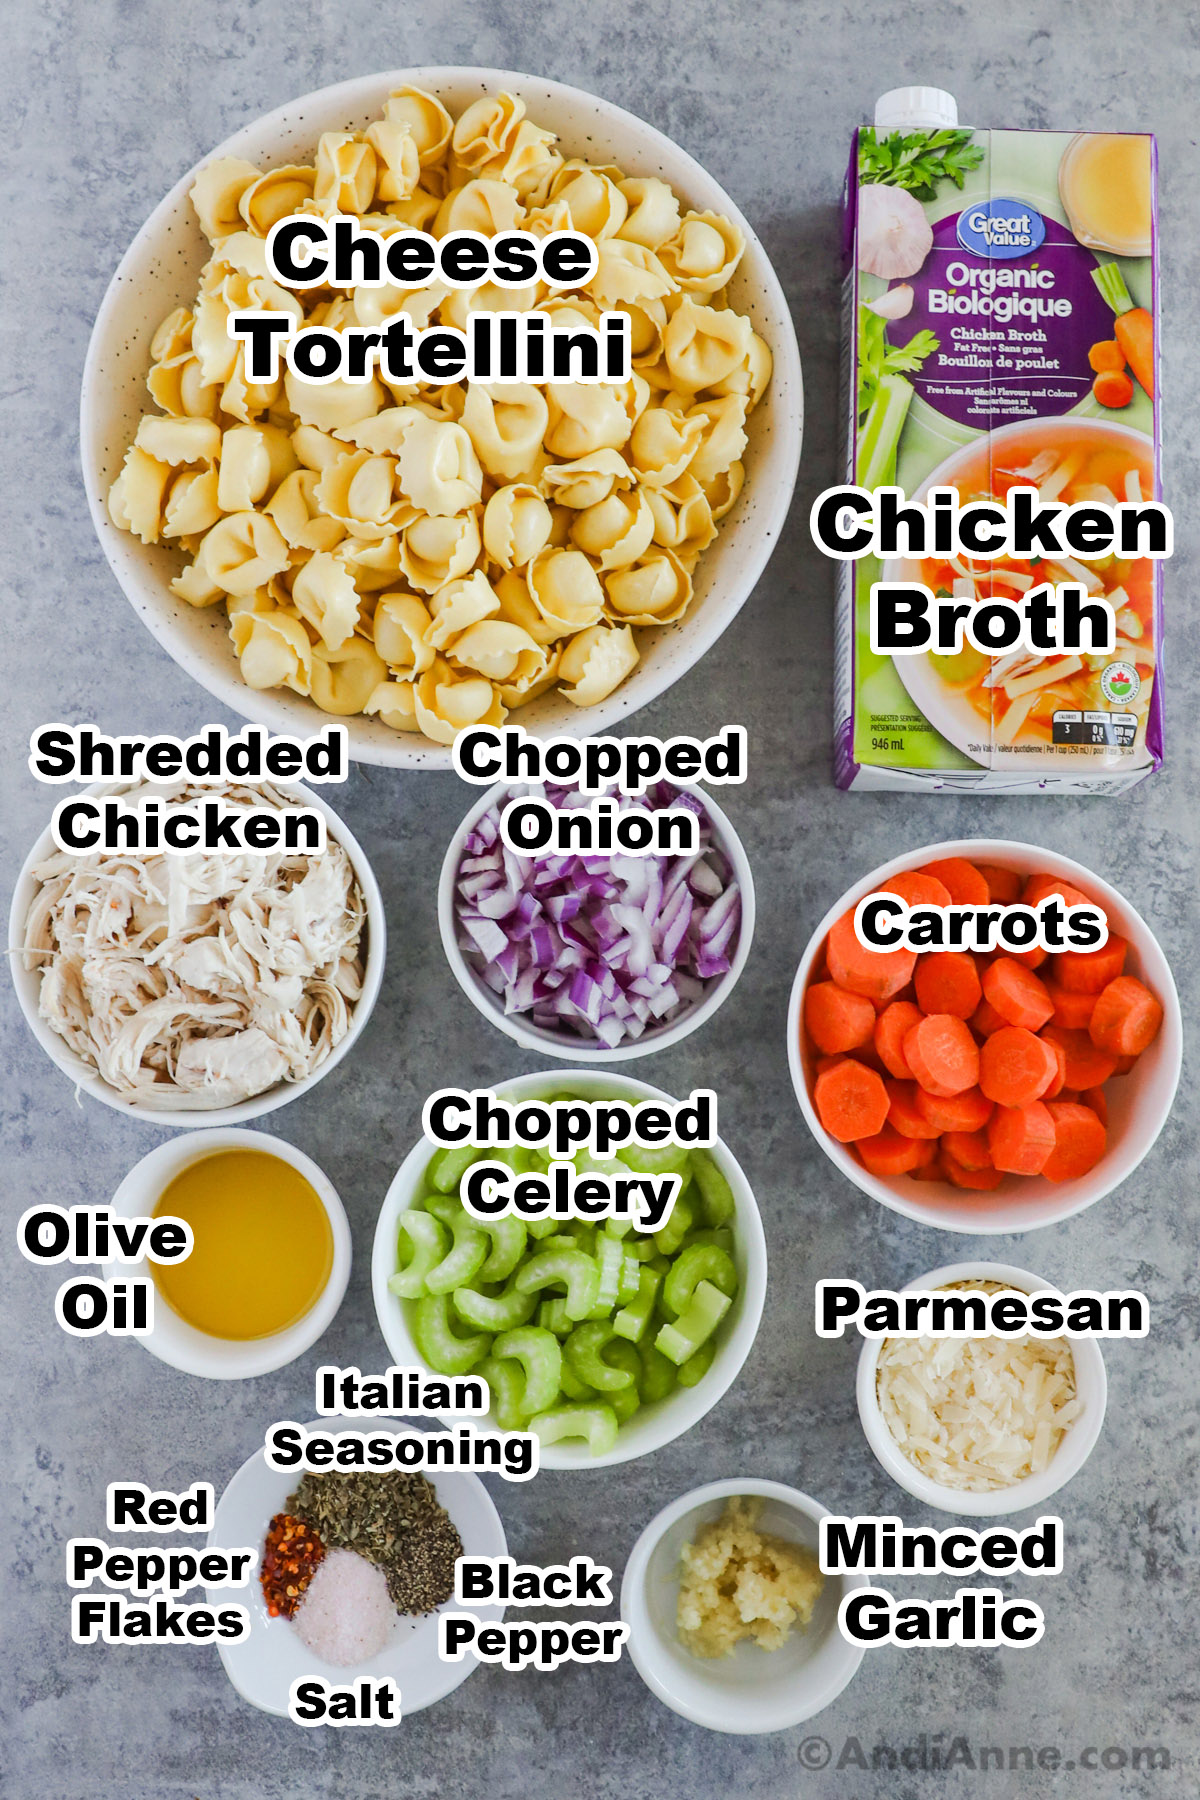 Recipe ingredients in containers including cheese tortellini, shredded chicken, chopped onion, carrots, celery, parmesan, olive oil, and broth.